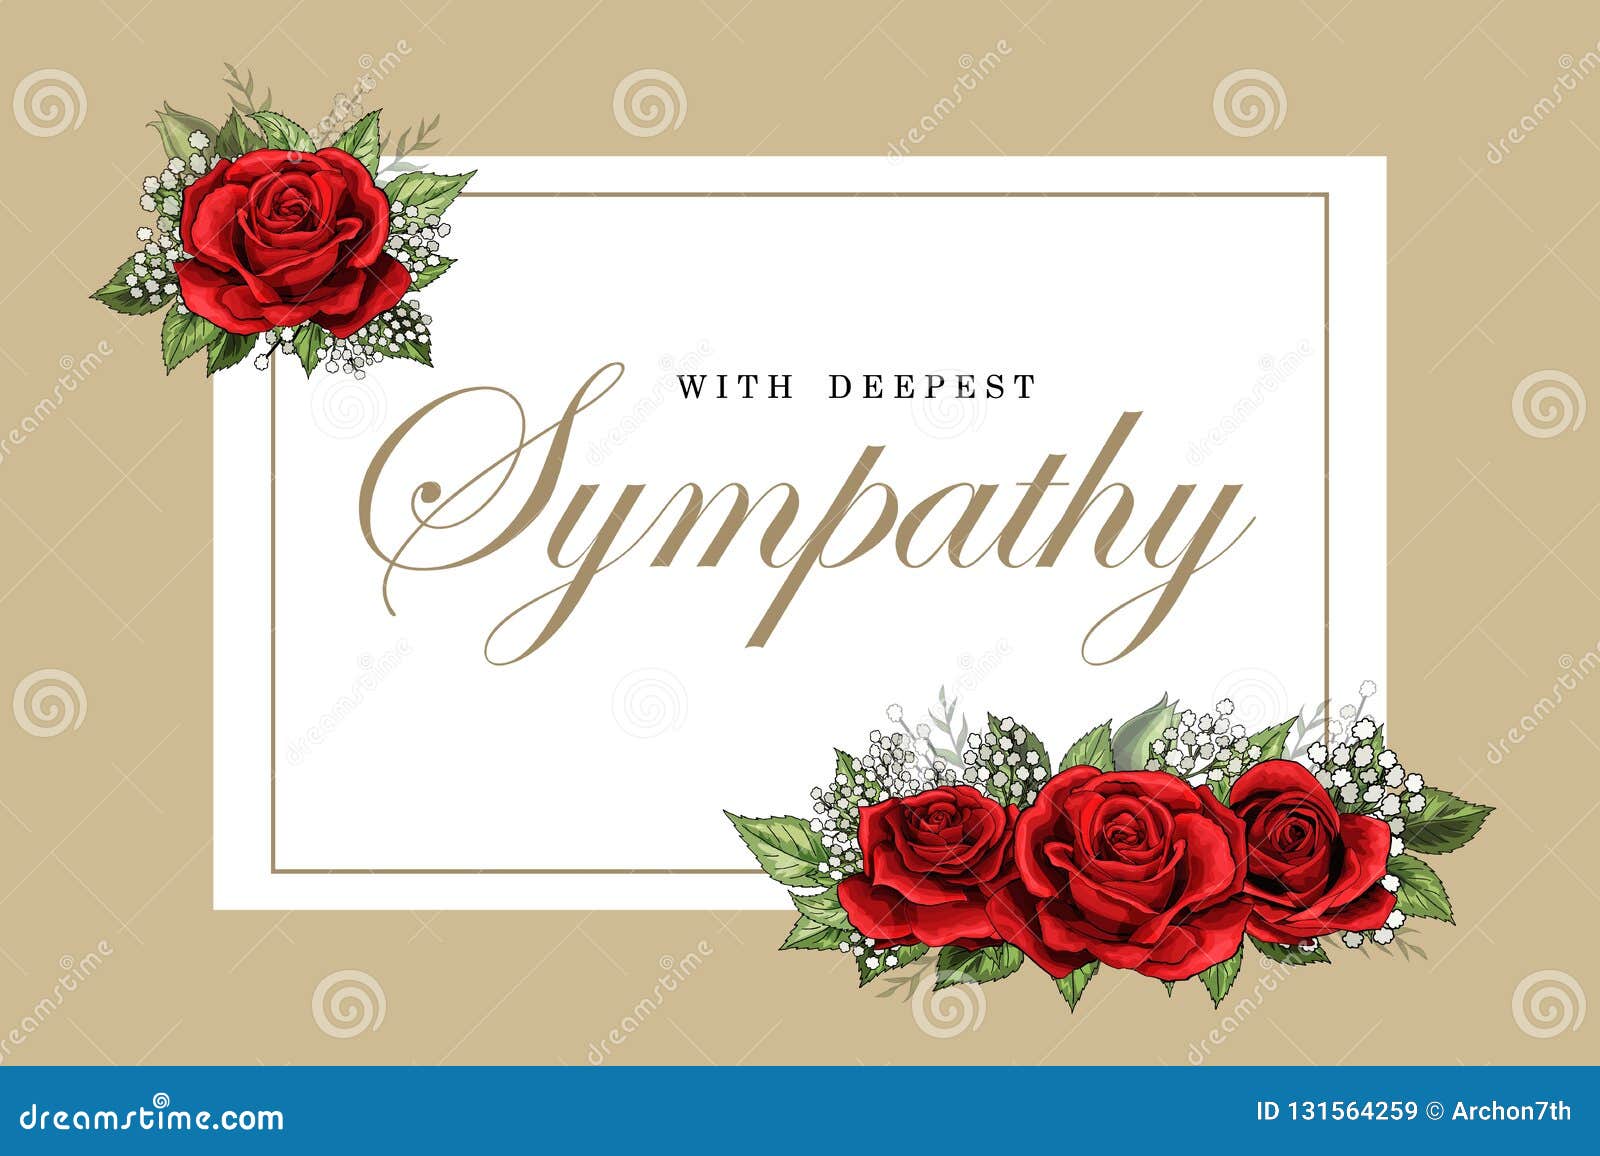 Condolences Sympathy Card Floral Red Roses Bouquet and Lettering With Regard To Sympathy Card Template